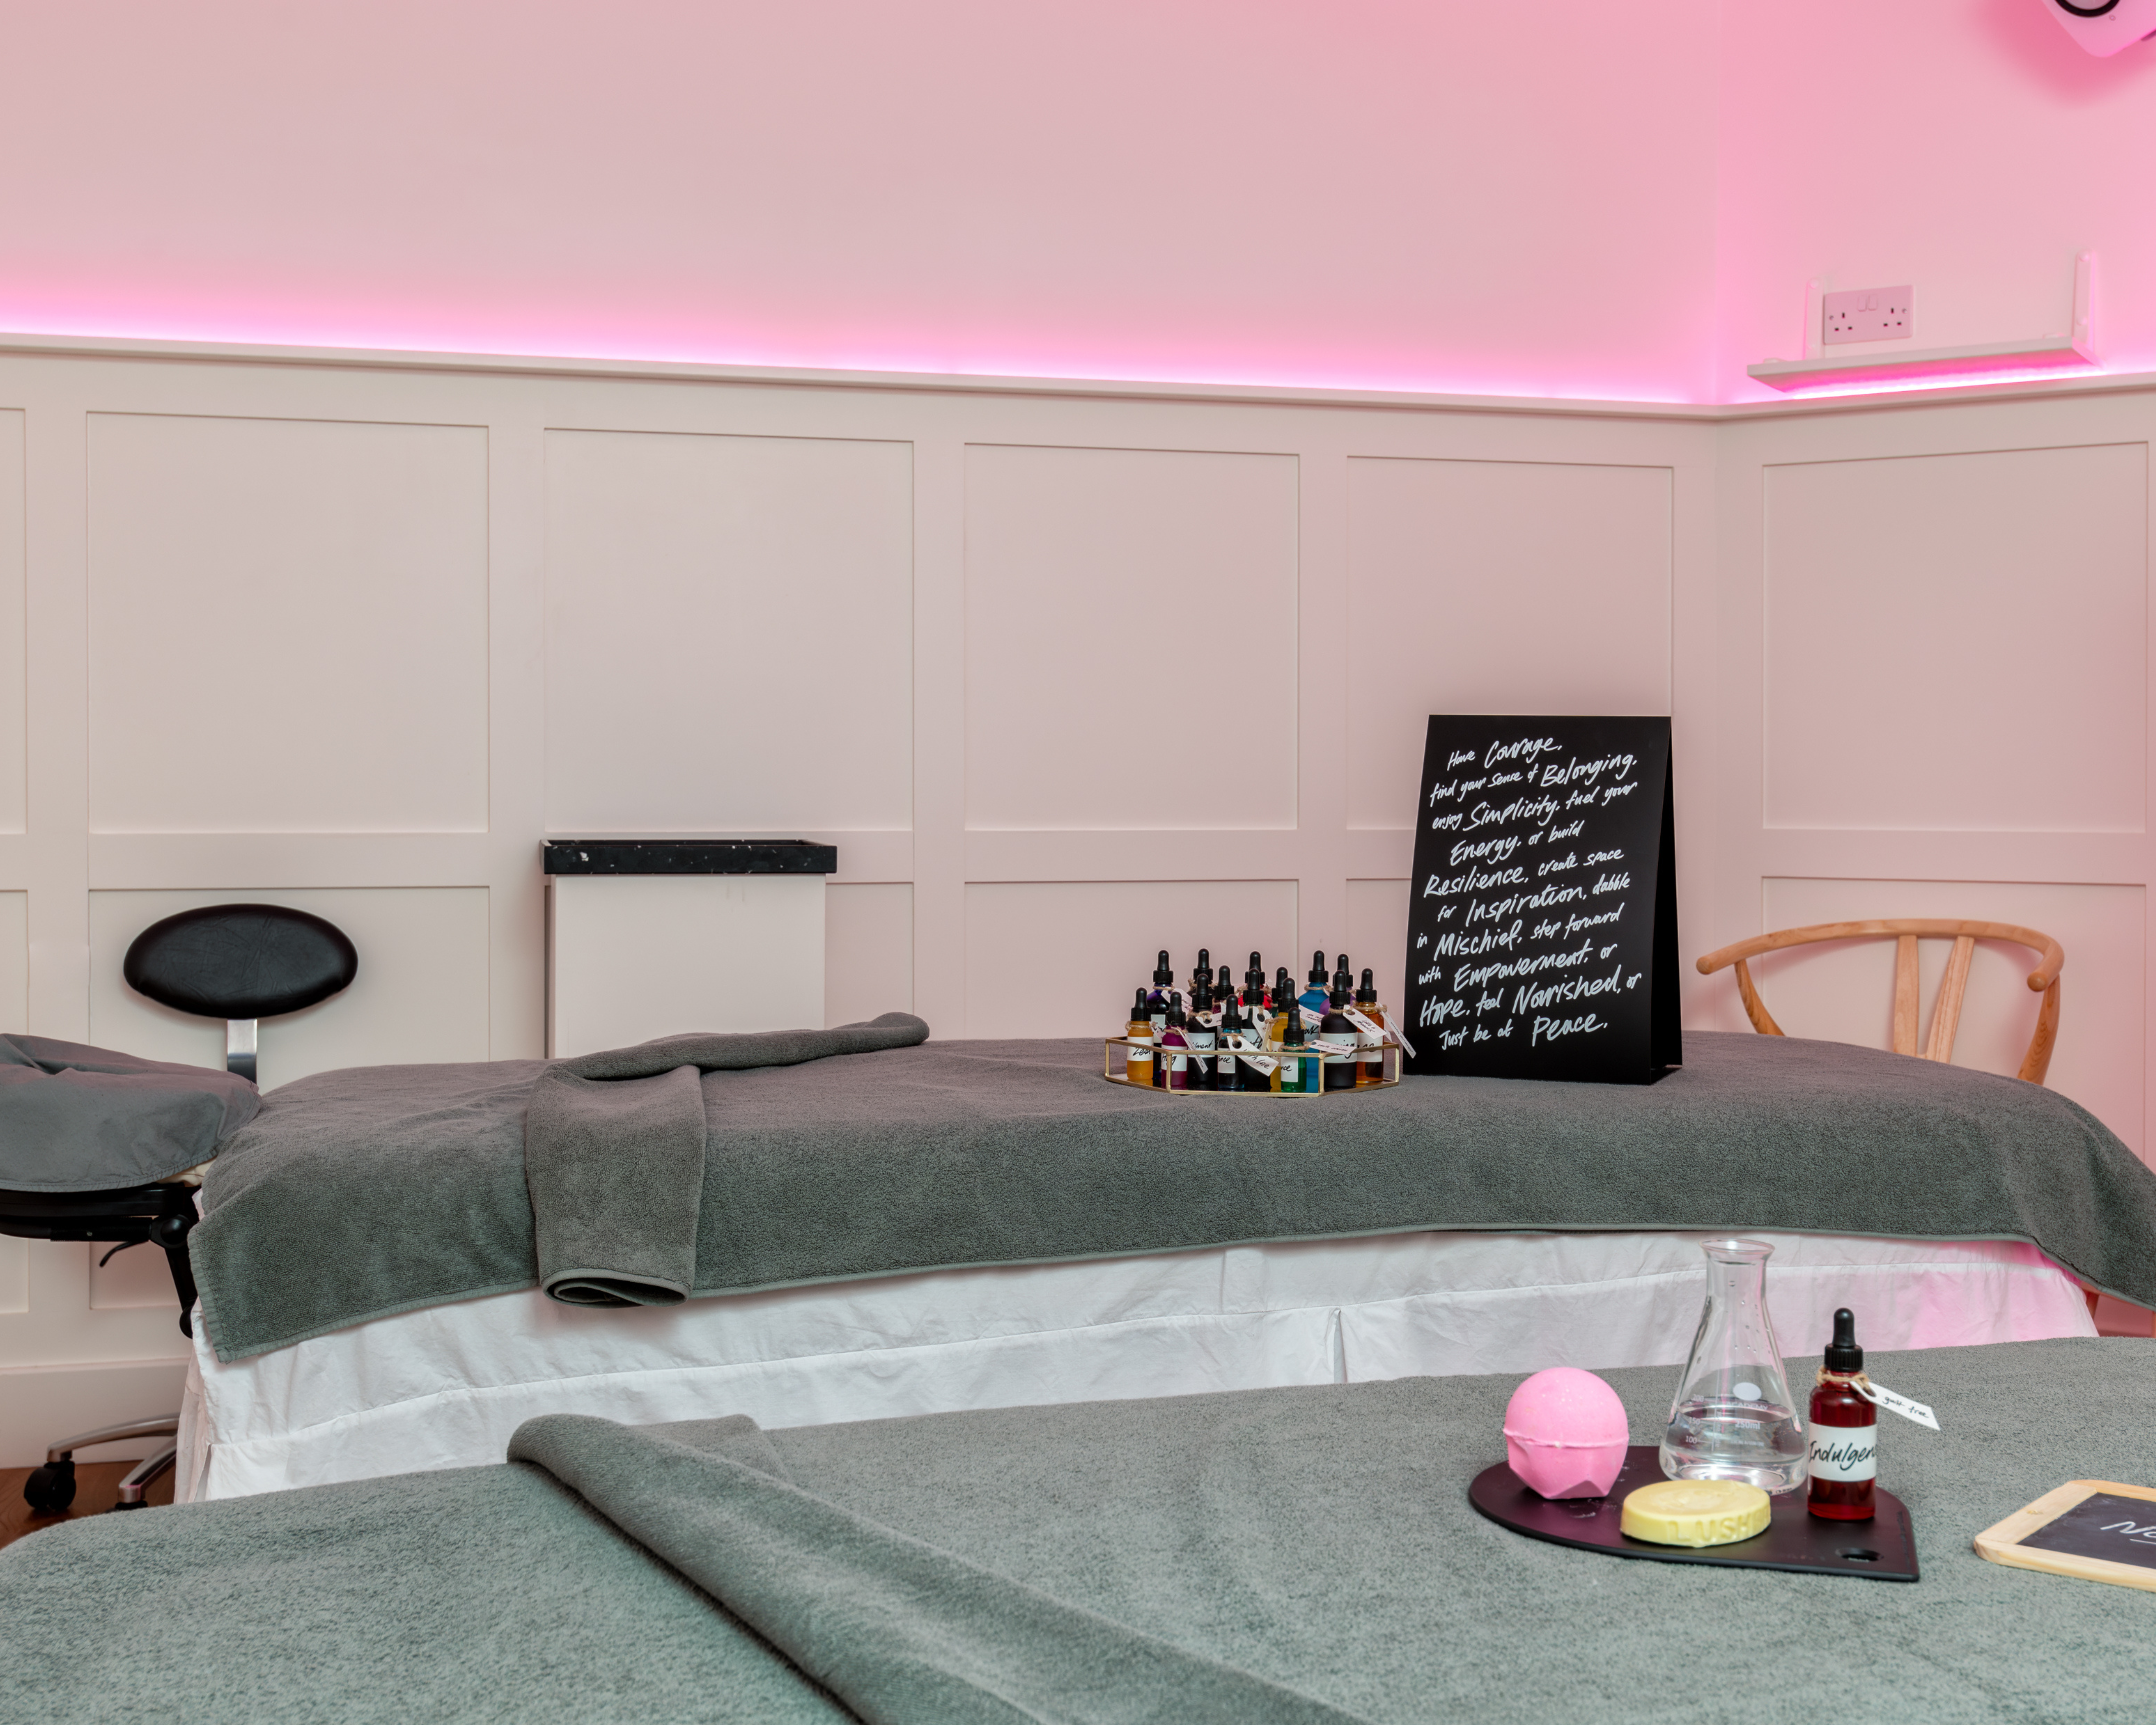 Lounge beds and beauty products pictured at the Lush Spa